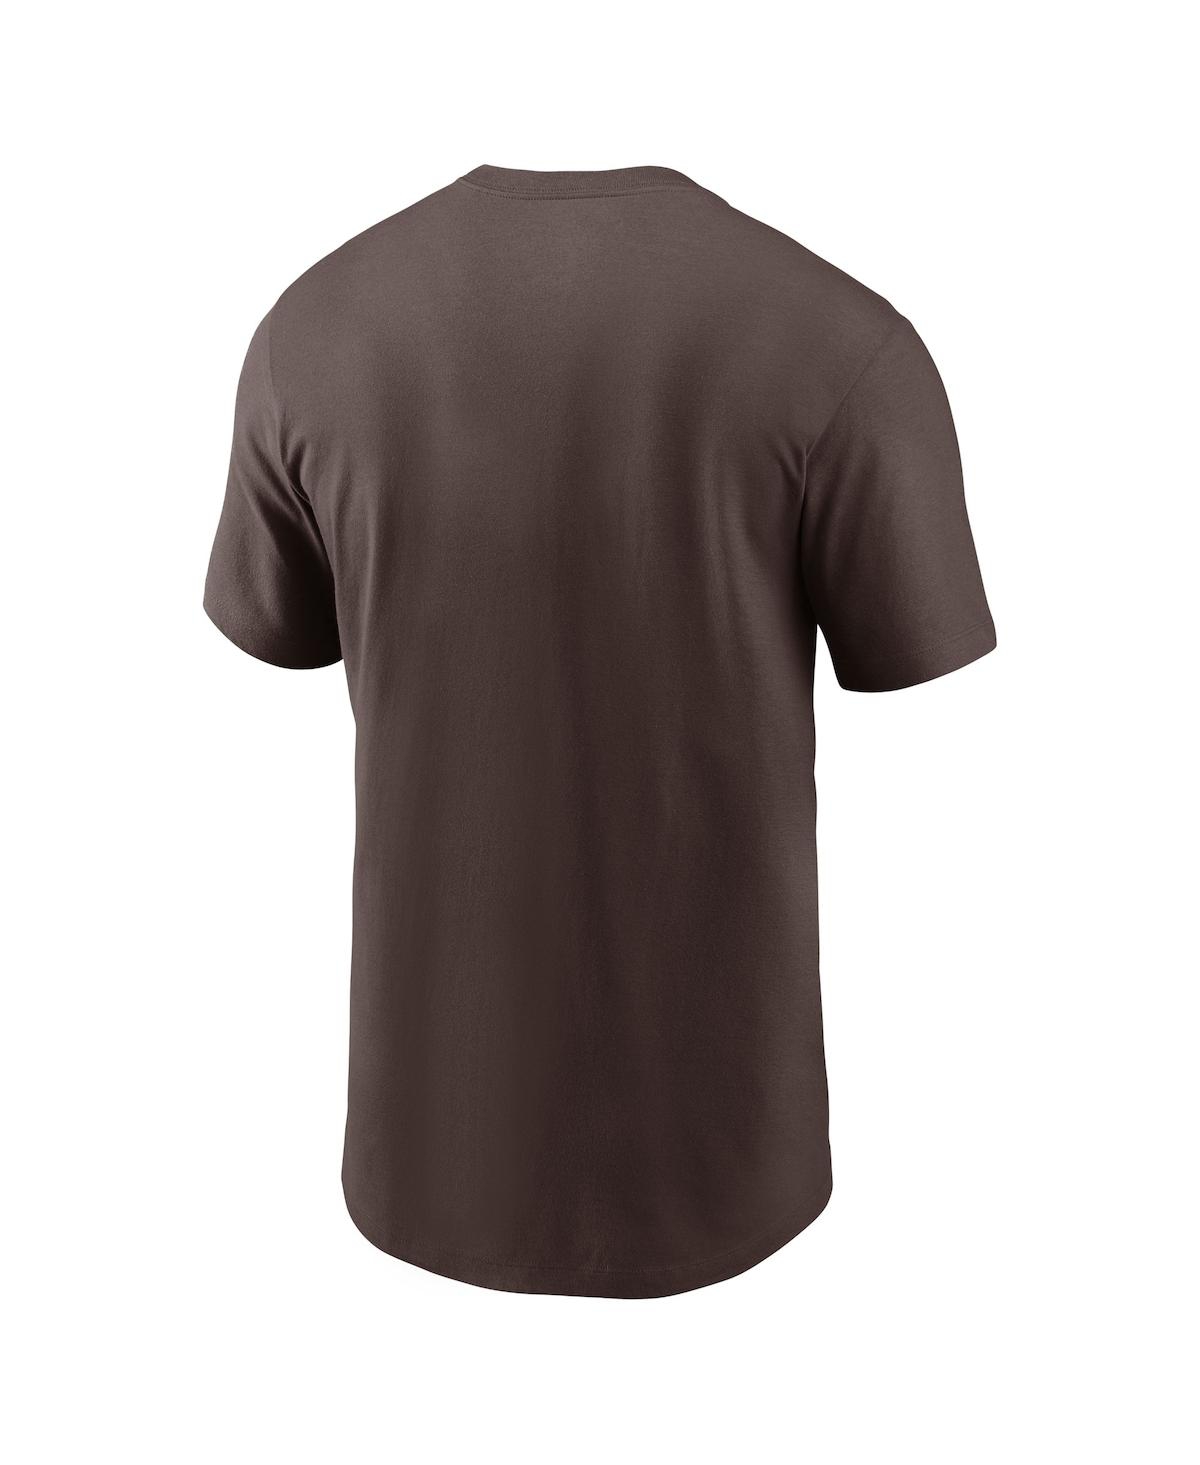 Shop Nike Men's  Heather Gray San Diego Padres Keep The Faith Local Team T-shirt In Brown